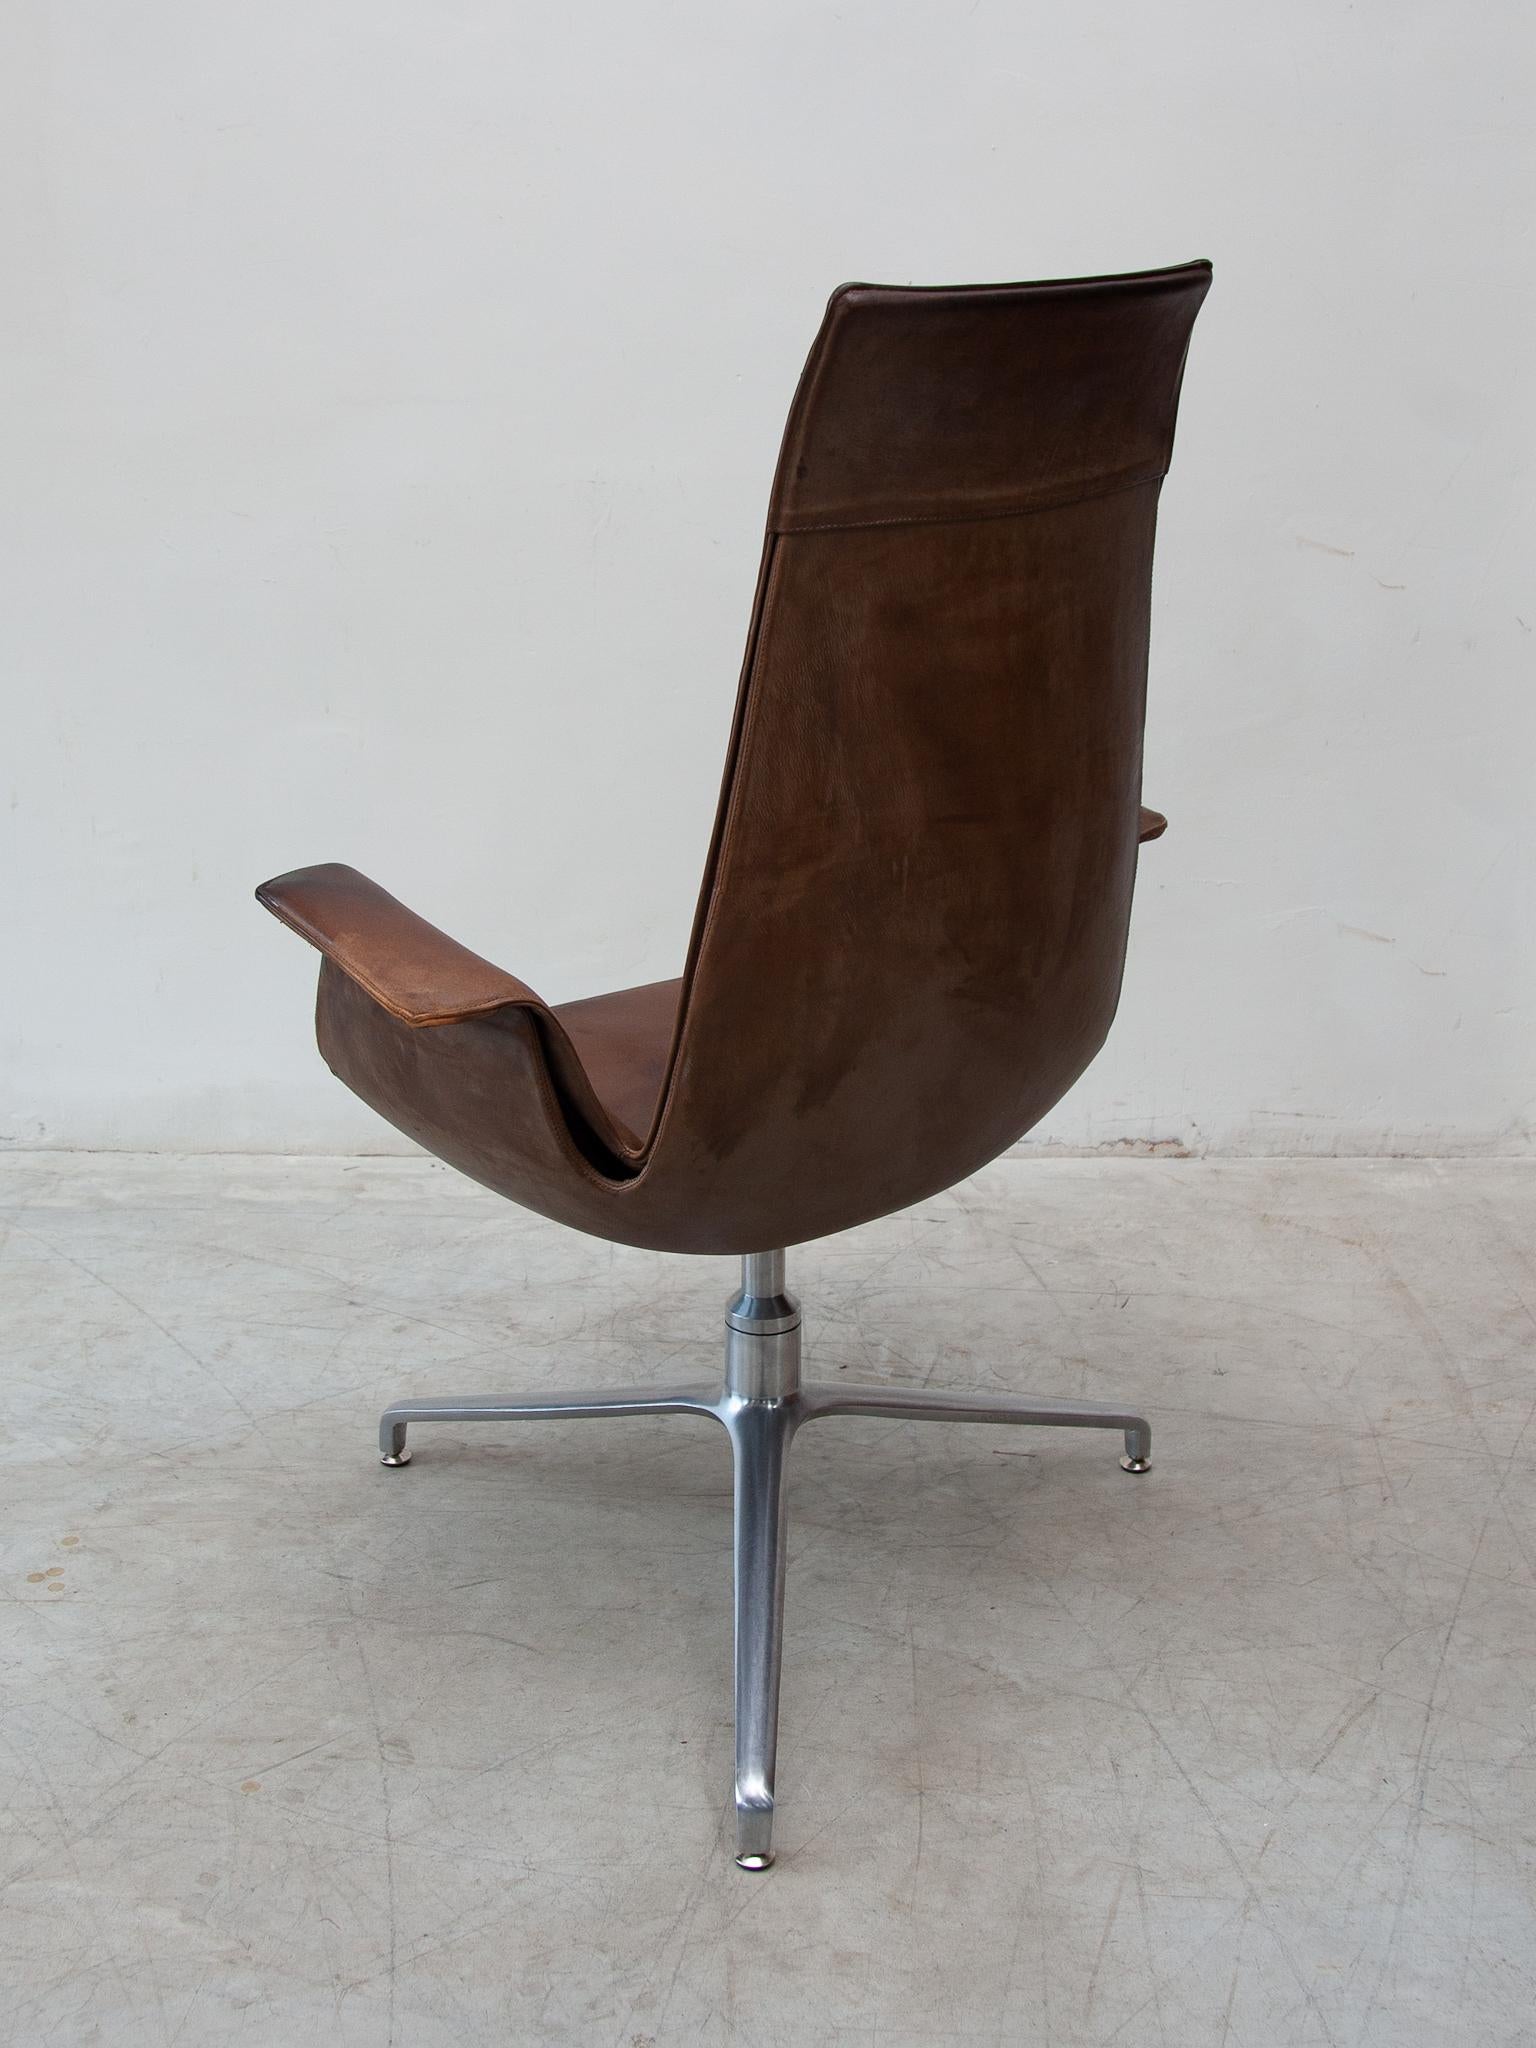 Stainless Steel Fabricius & Kastholm FK6725 Desk, Lounge Chair in Brown Leather, Kill For Sale